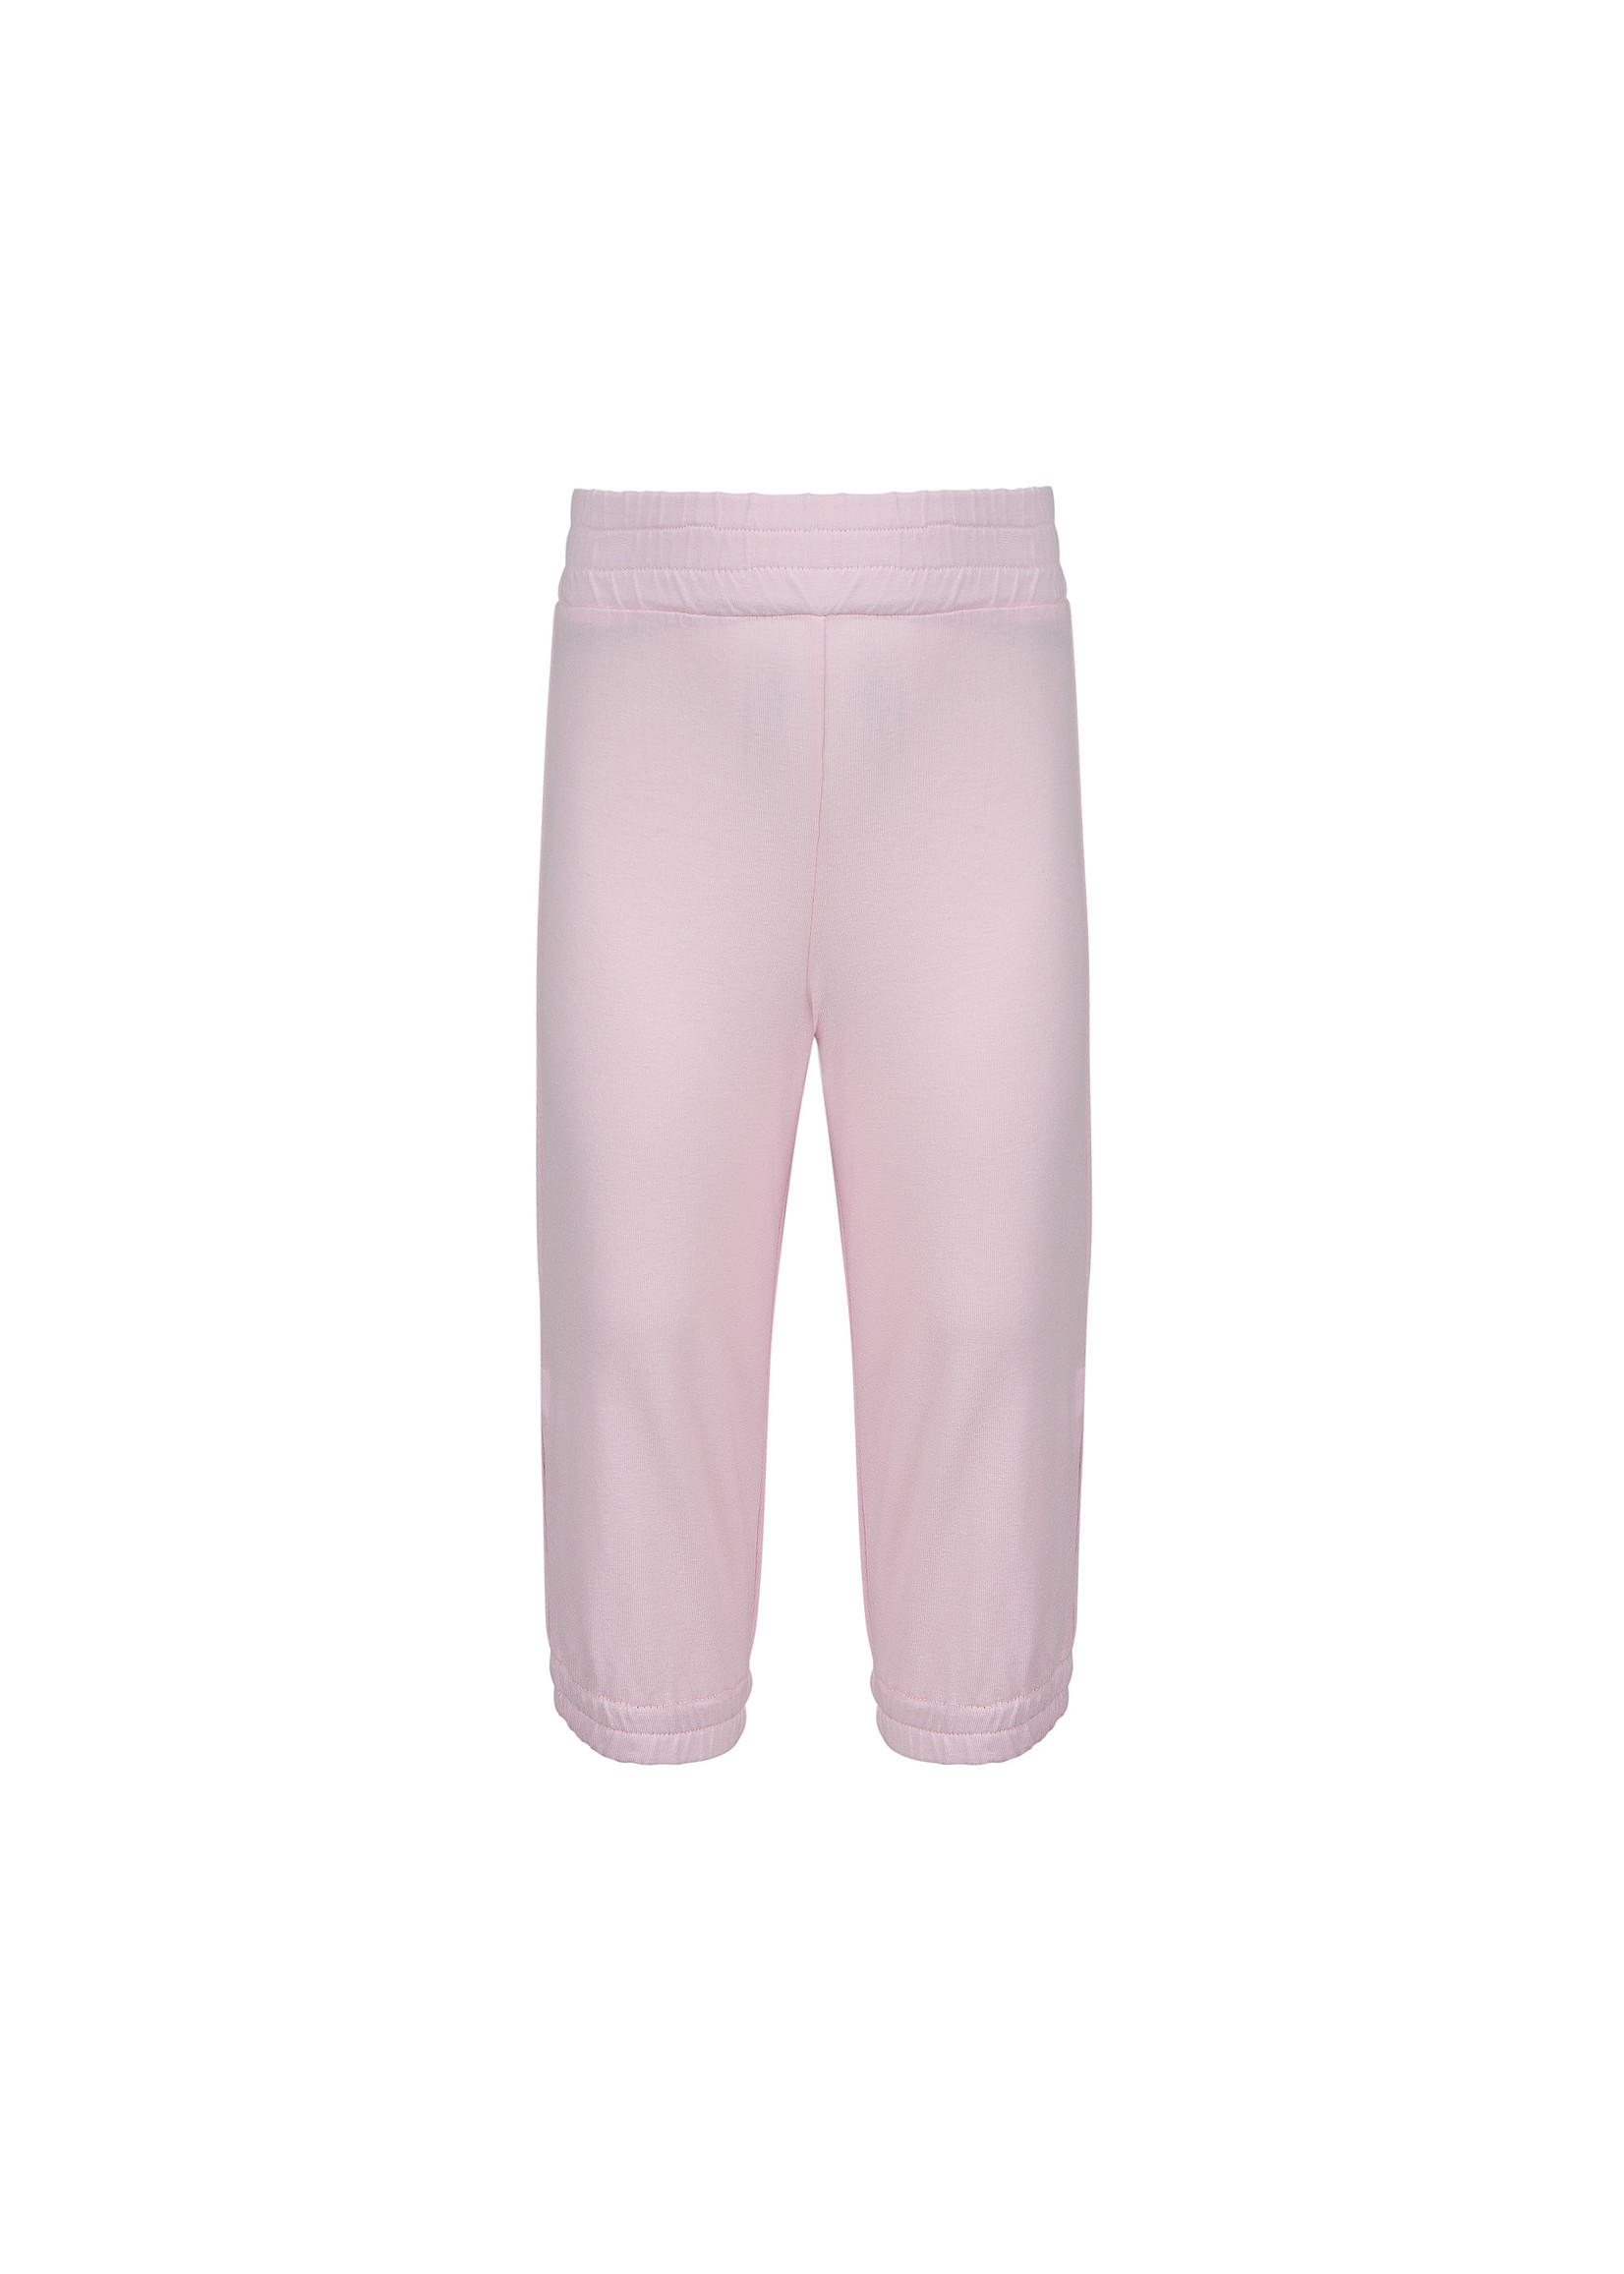 Lapin House Lapin House trainingsset sweater & pants pink flower pink - 221E5416